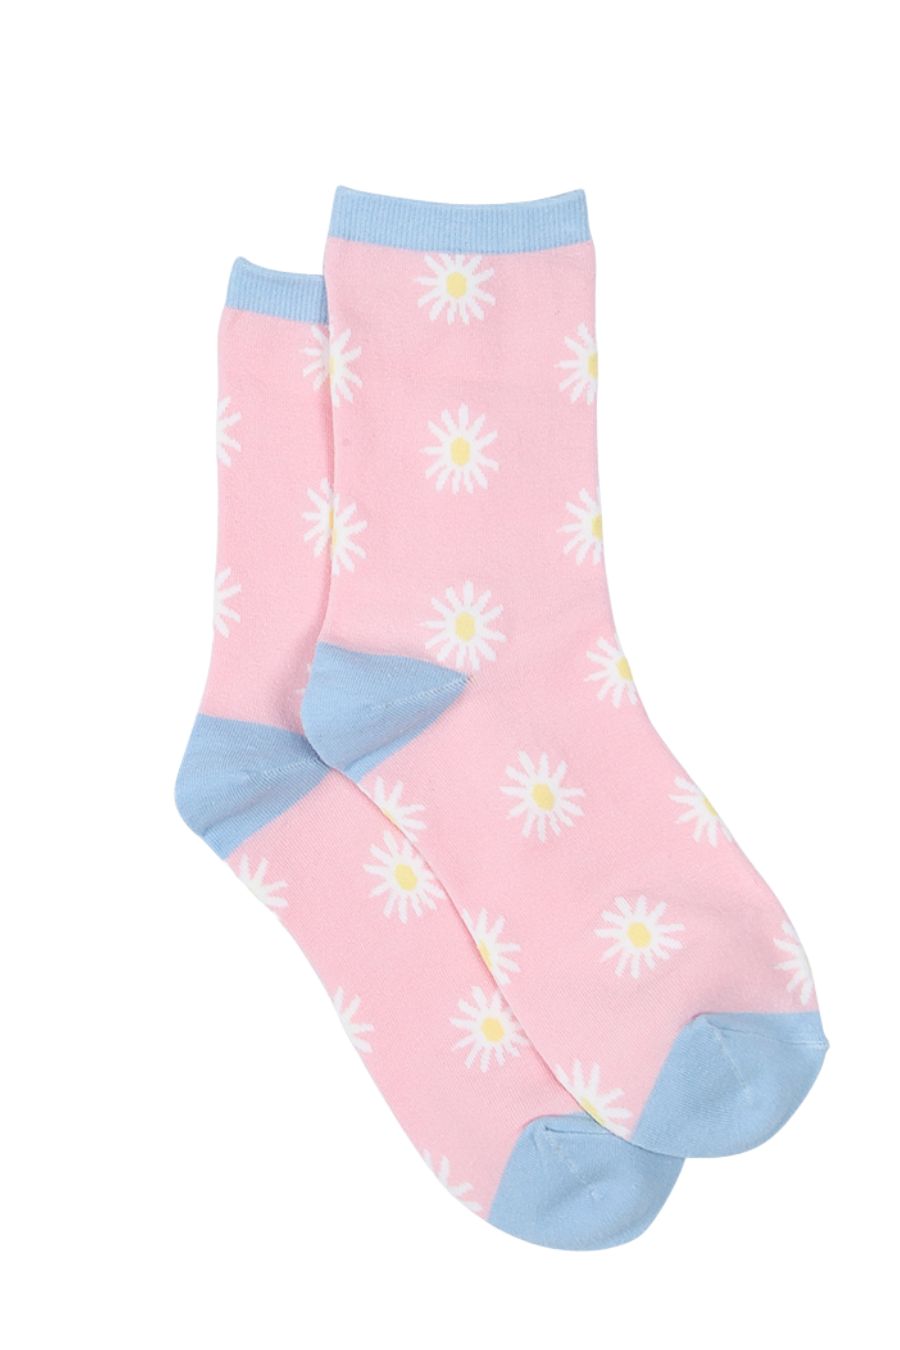 pink ankle socks with an all over daisy floral print